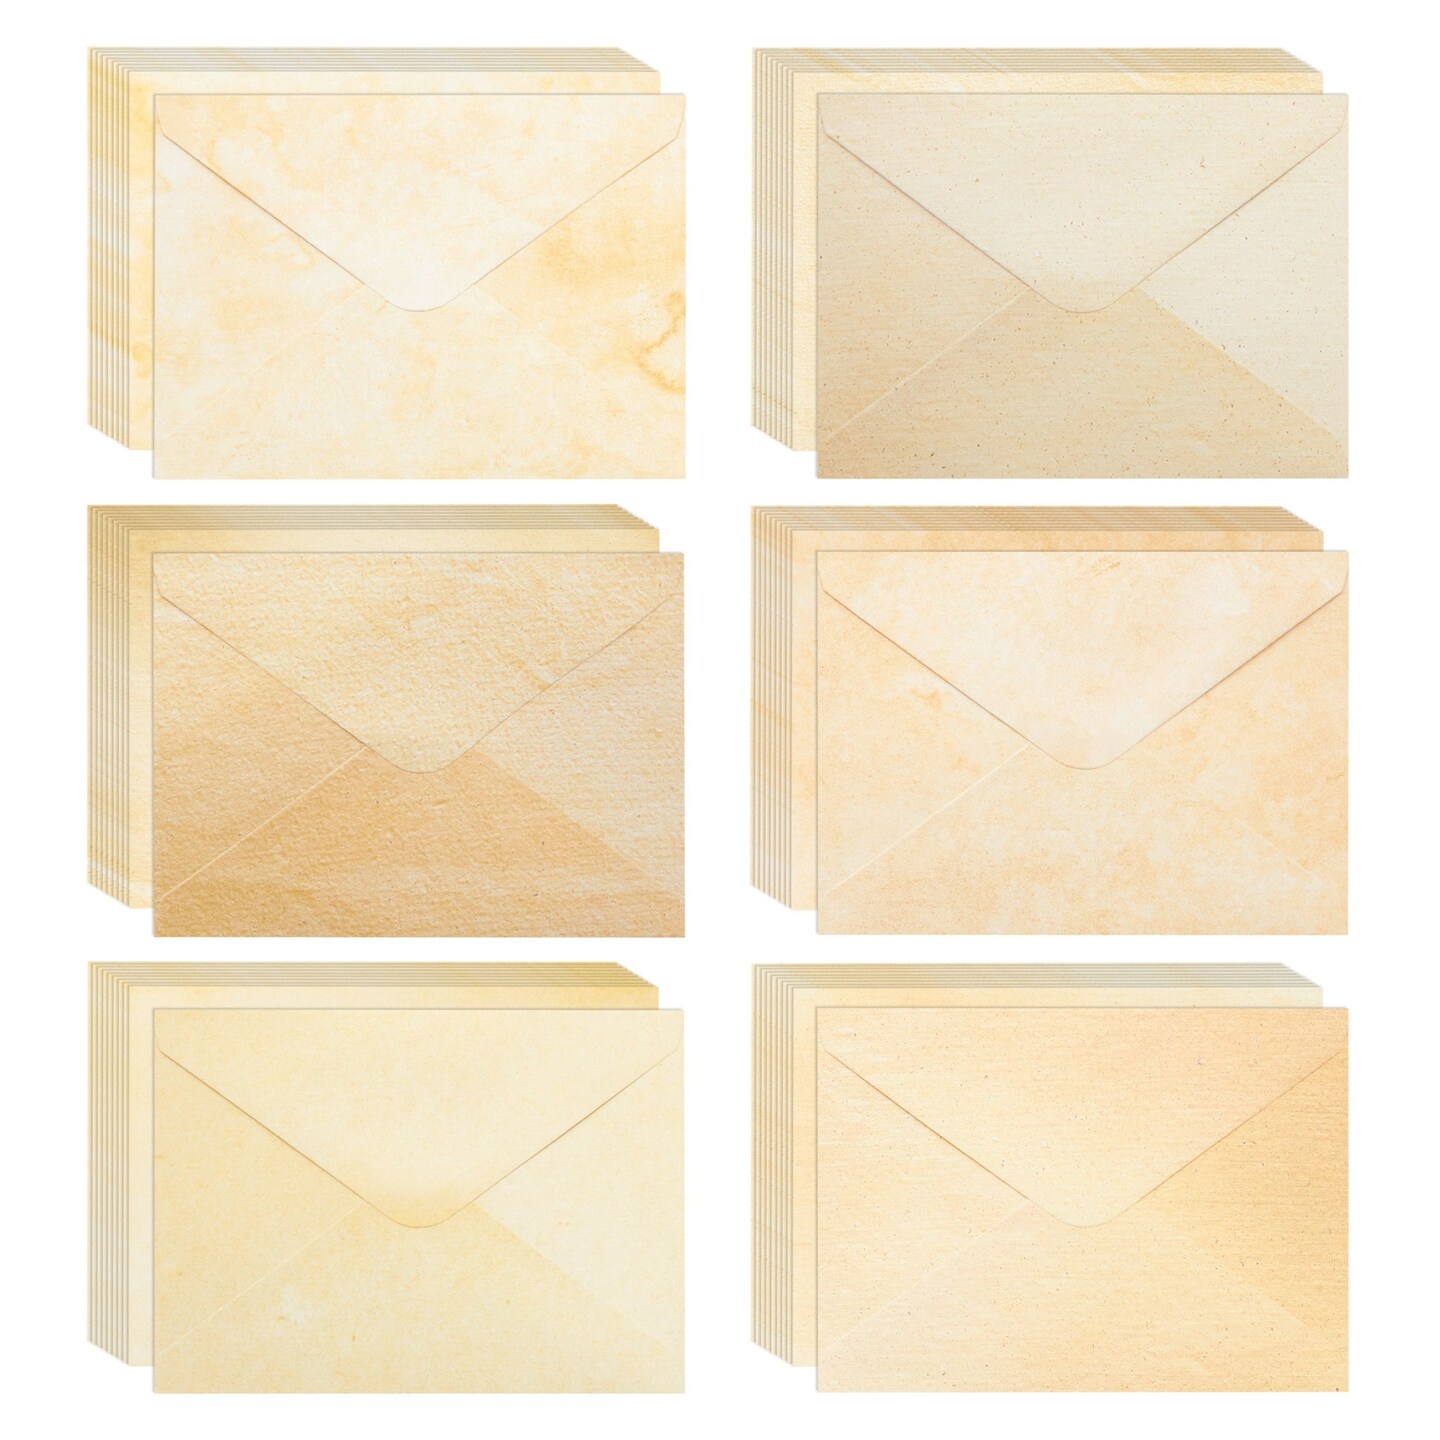 60 Blank Notecards and 60 Antique Envelopes for Invitations, Greeting Cards  (5 x 7 In)